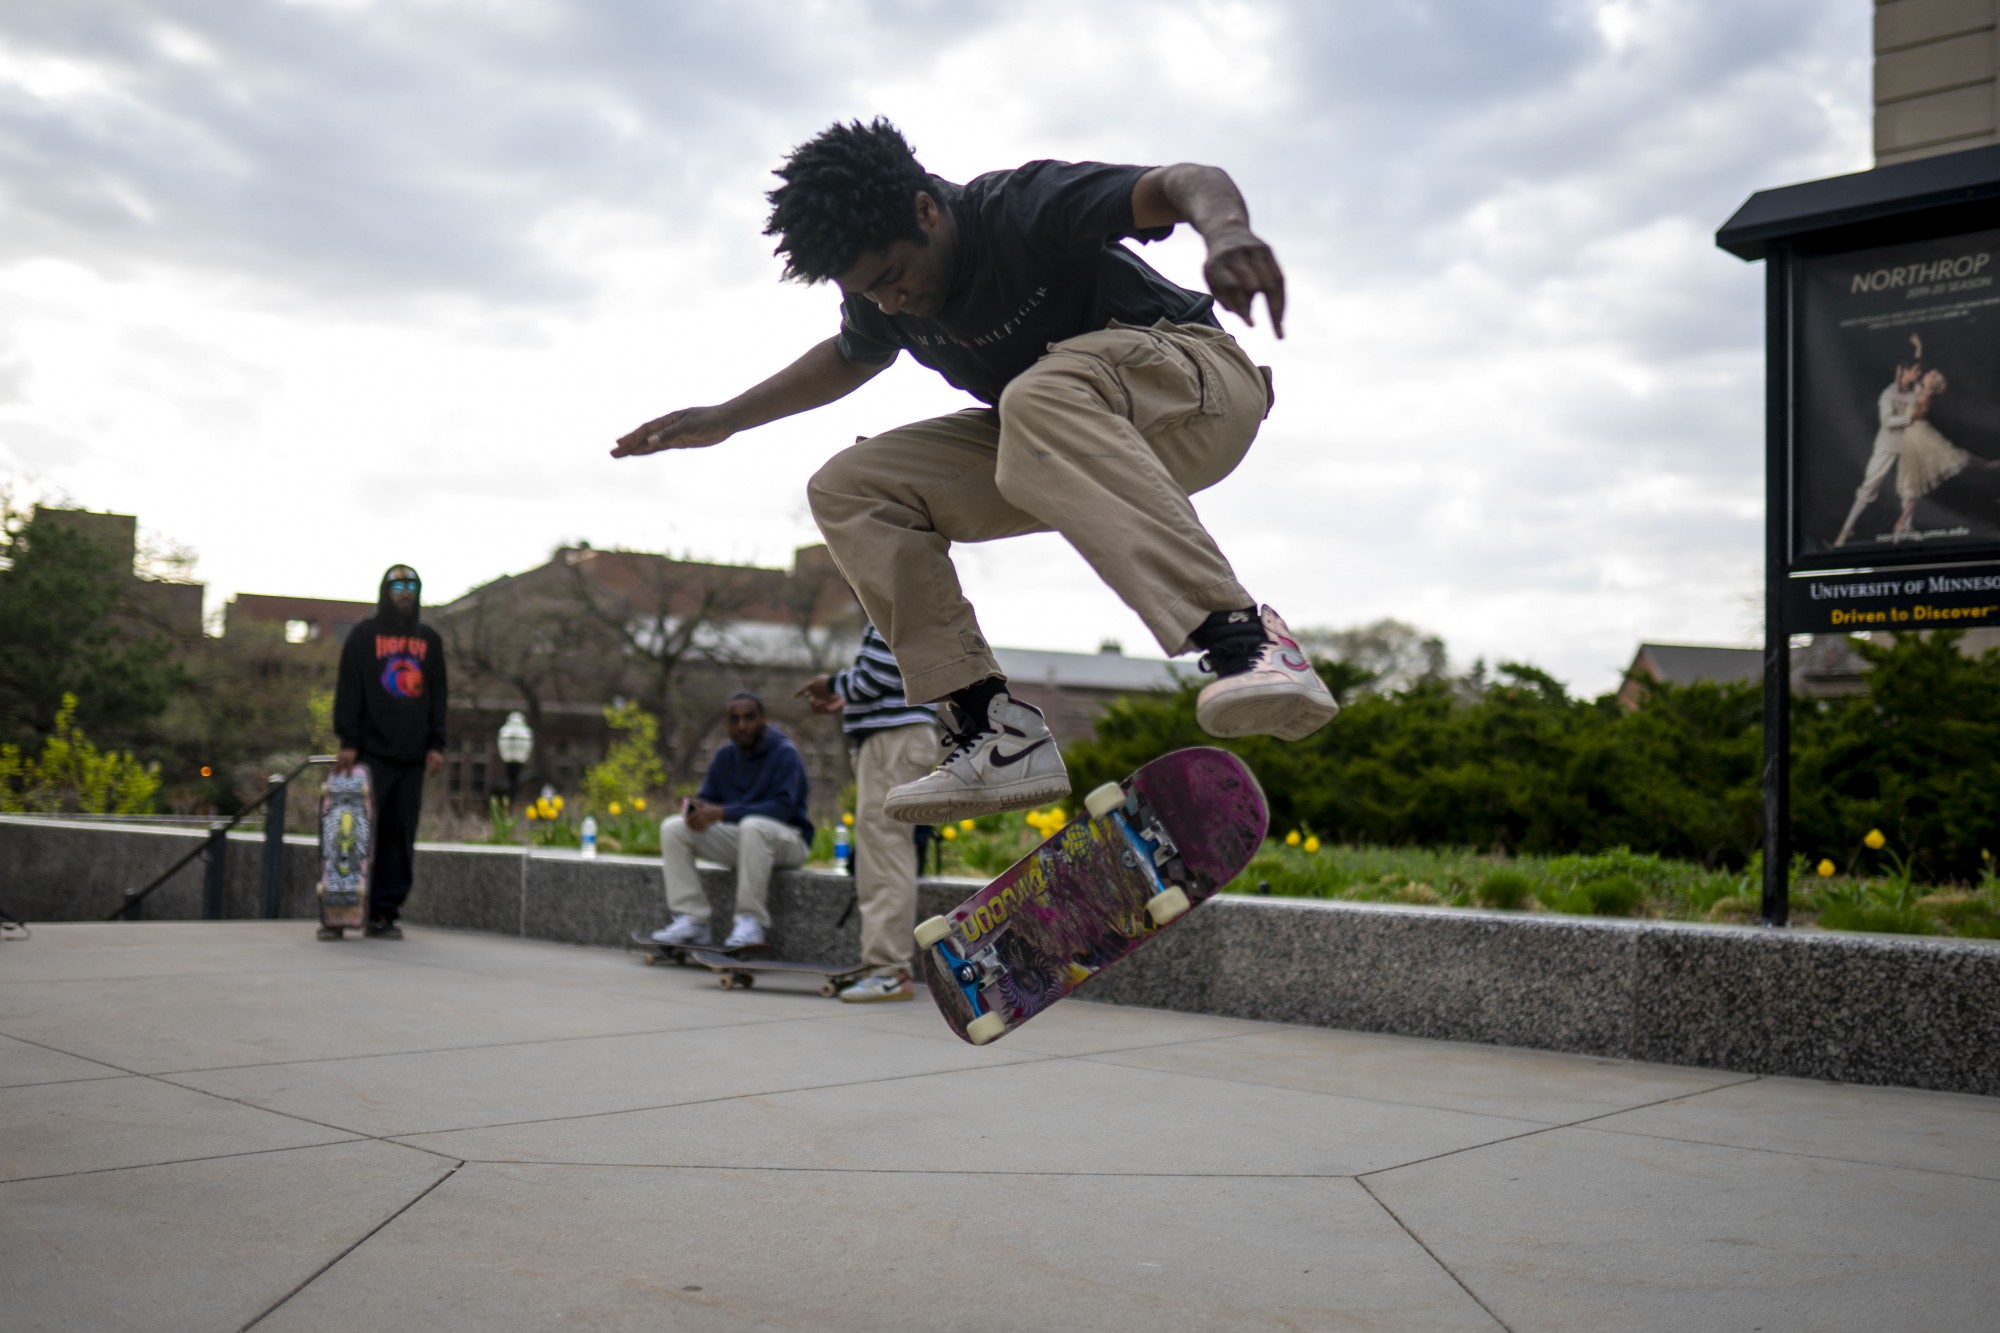 7:02 p.m.
Zack Wooten does a kick flip in front of Northrup Memorial Auditorium. Wooten and his friends took advantage of an empty campus to film a skate video. 